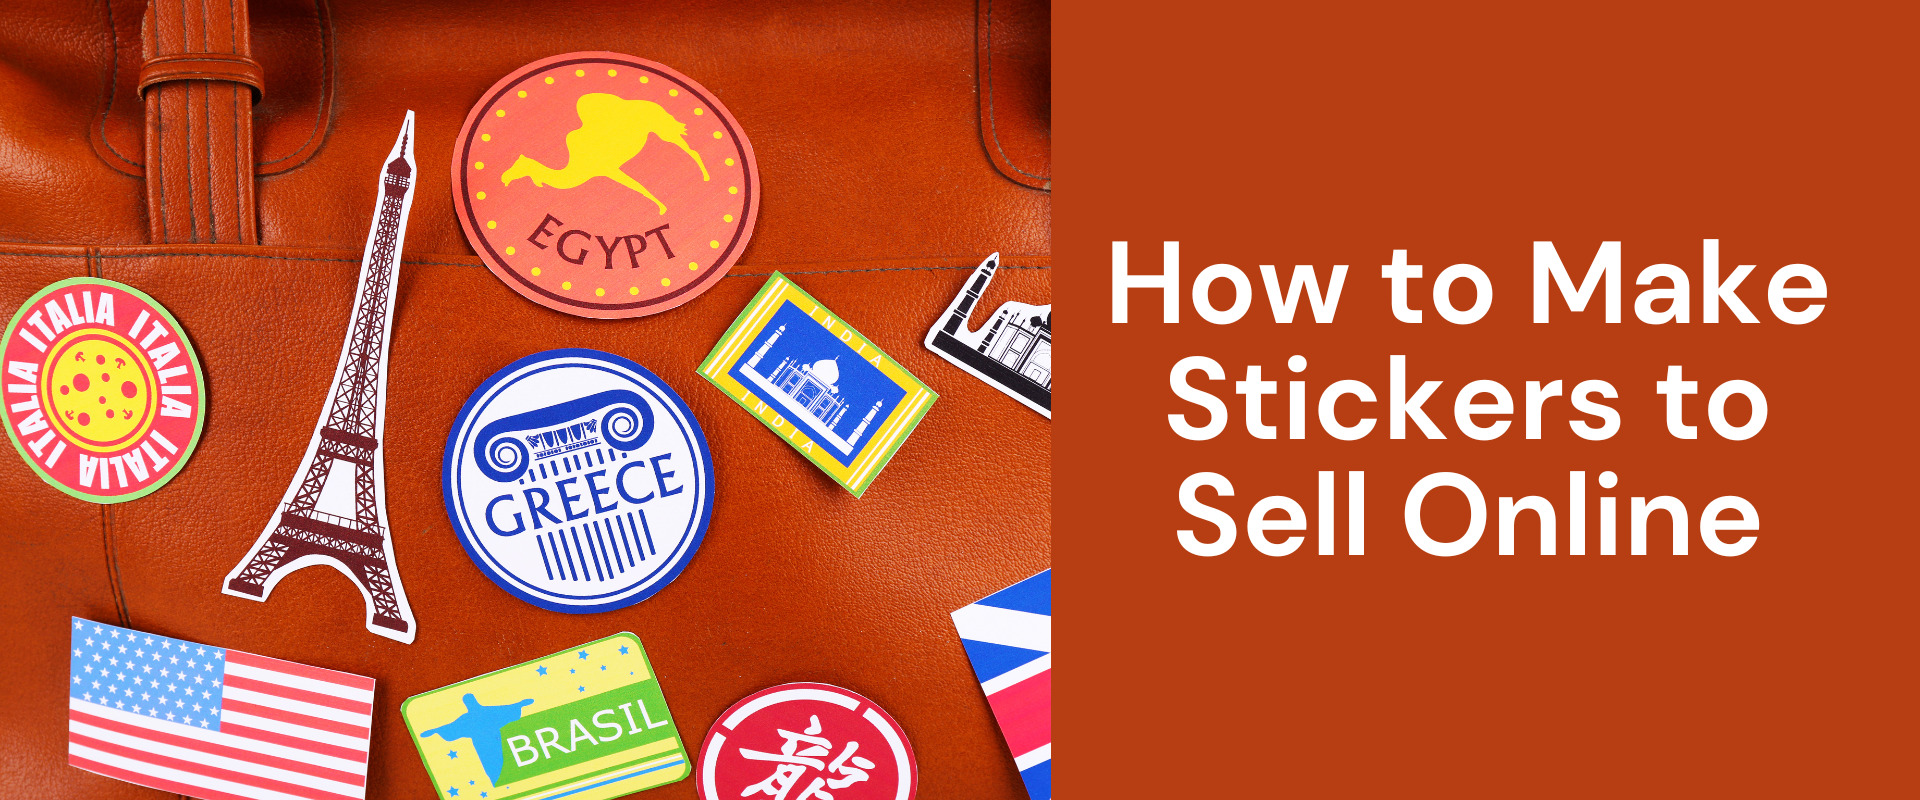 How to Make Stickers to Sell Online: Best Guide for Beginners